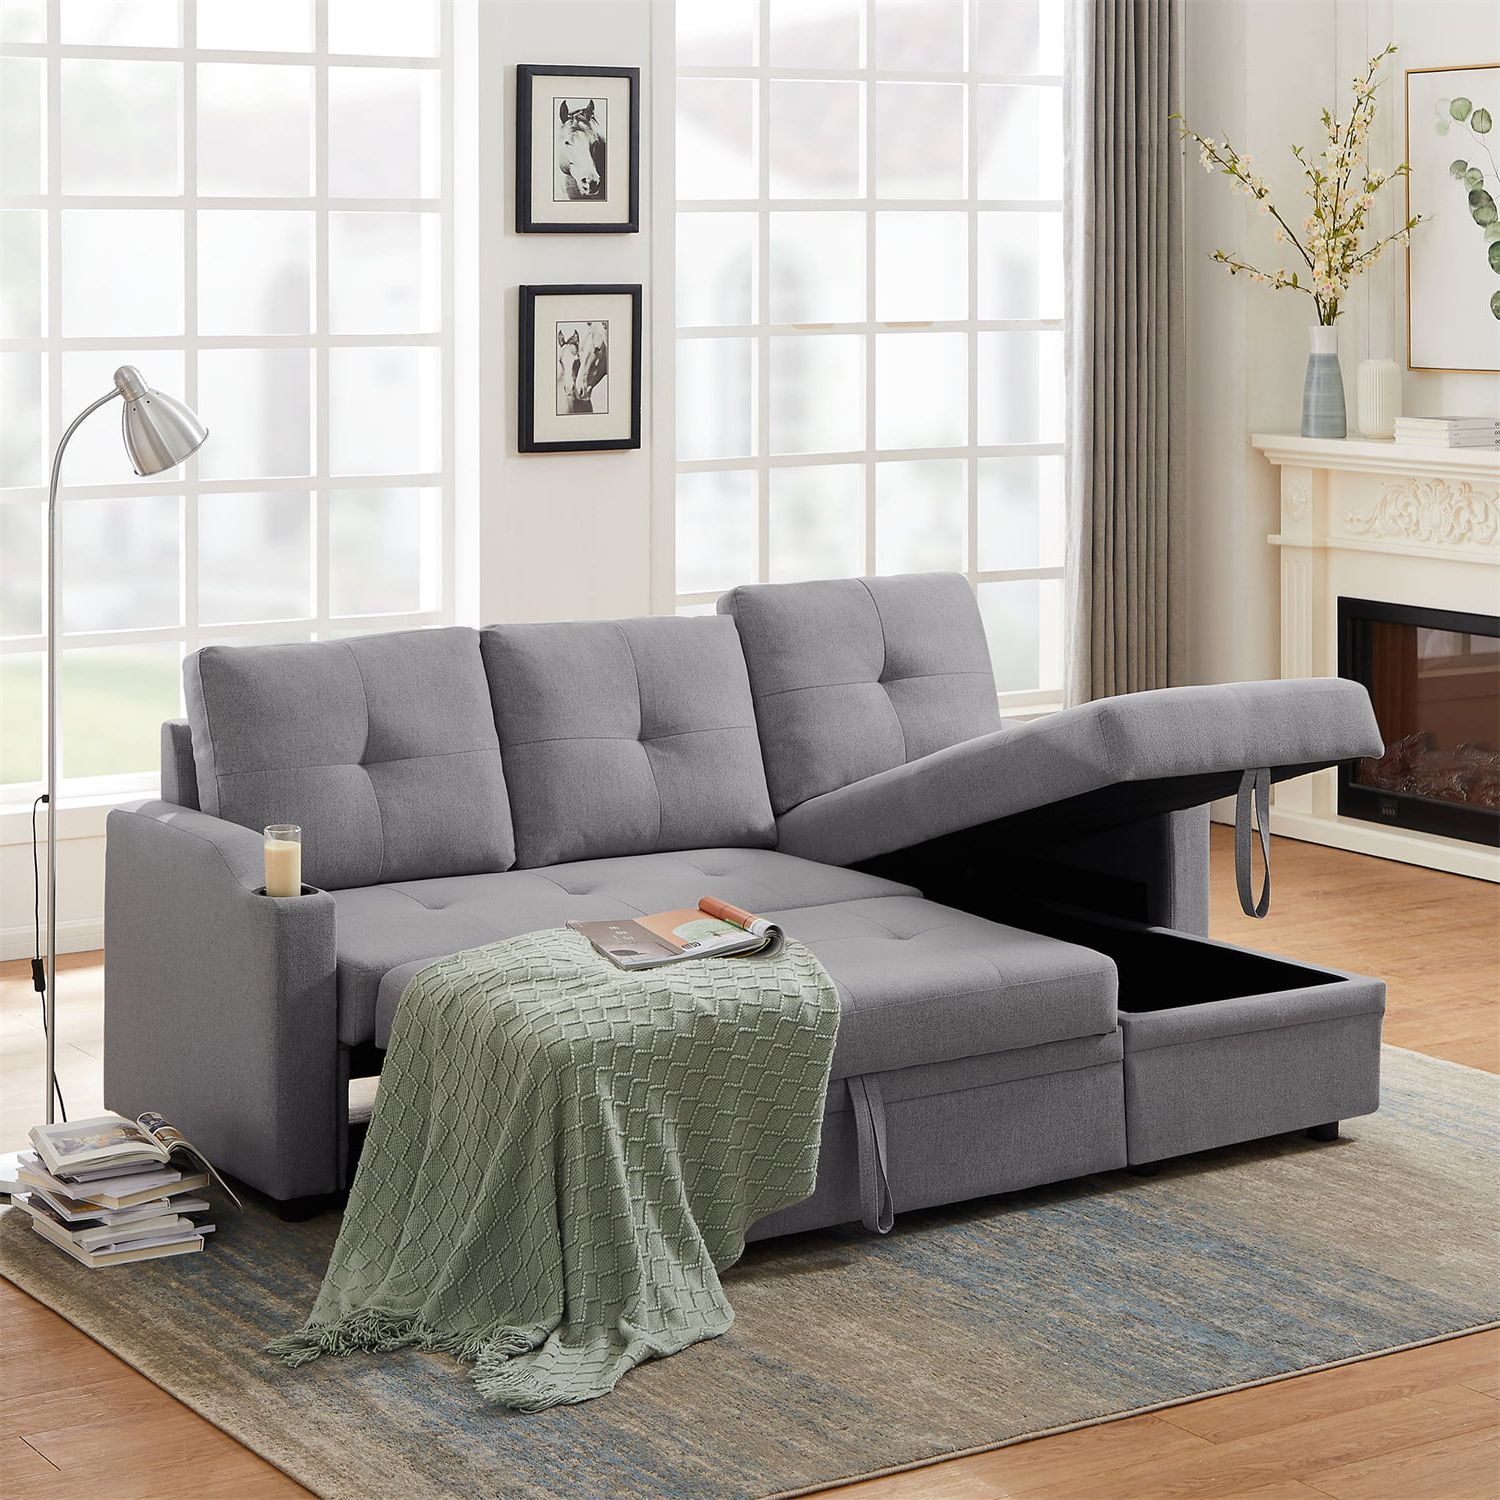 80.7" Reversible Sofa Sleeper, Tufted Upholstered Sectional Sofa Couch With  Pull Out Sleeper, Corner Couch Sofa Bed With Storage Chaise And Two  Cup Holders For Living Room, Grey – Walmart Inside Reversible Pull Out Sofa Couches (Gallery 1 of 20)